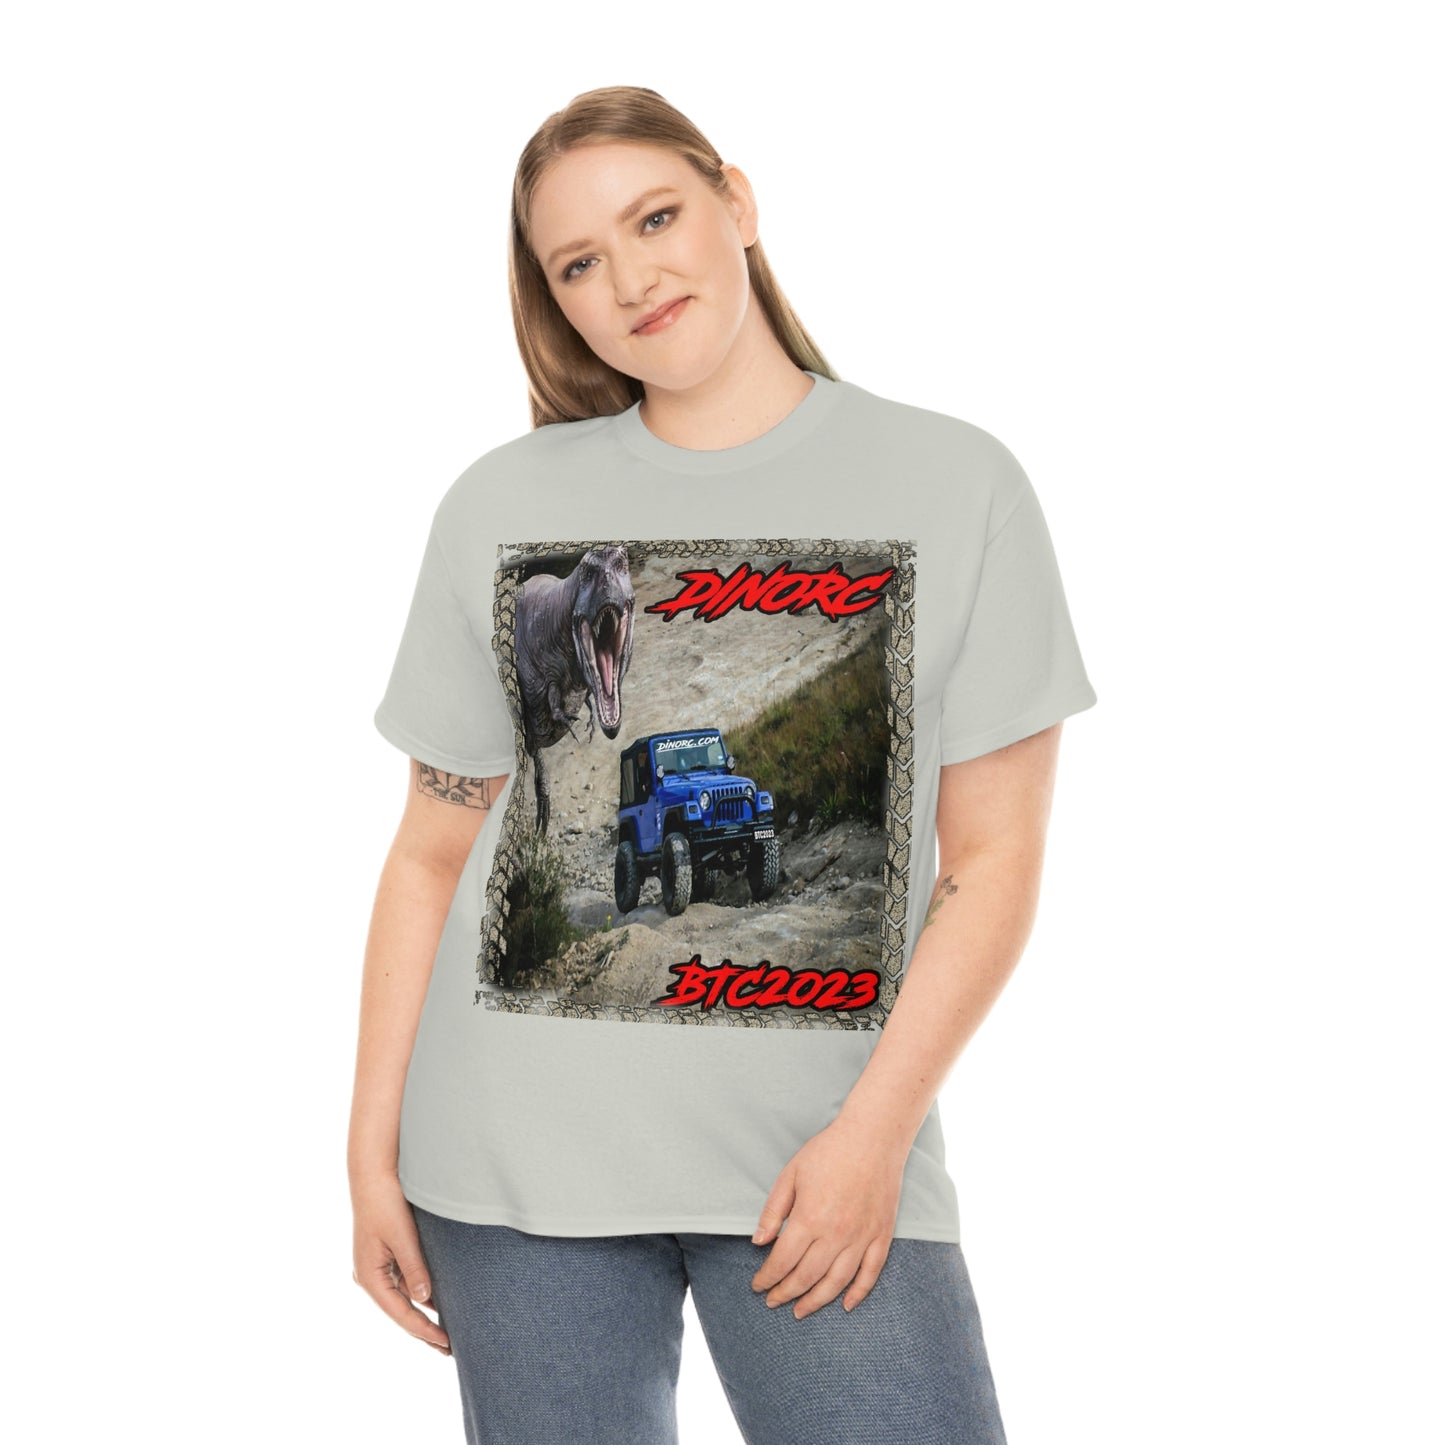 Headlights Beat The Barn BTC DinoRC logo Front and Back DinoRc Logo T-Shirt S-5x 5 colors